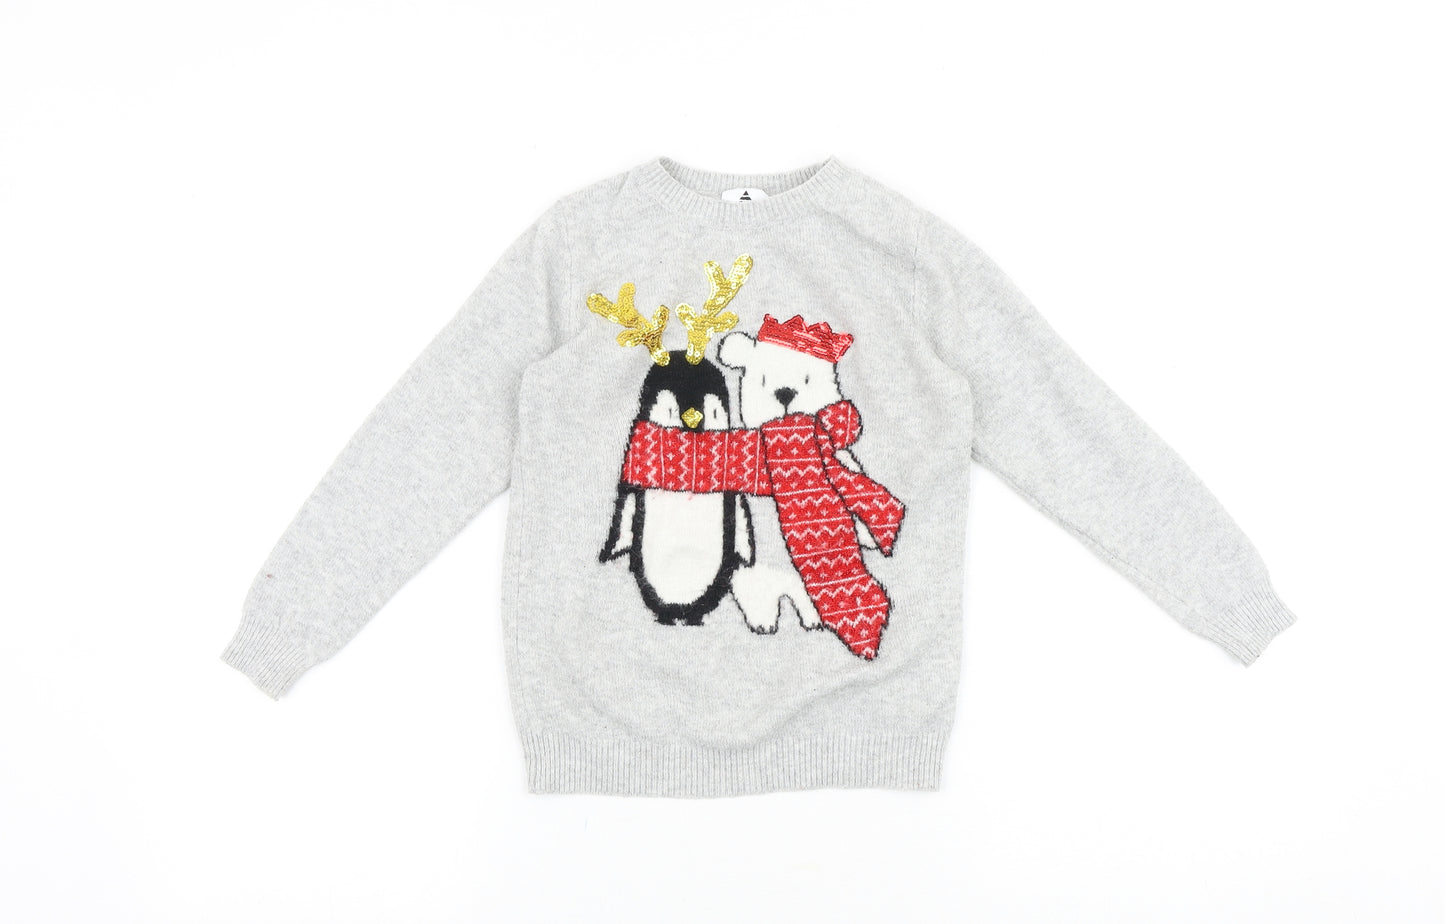 George Girls Grey Round Neck Cotton Pullover Jumper Size 7-8 Years Pullover - Christmas Penguin and Polar Bear